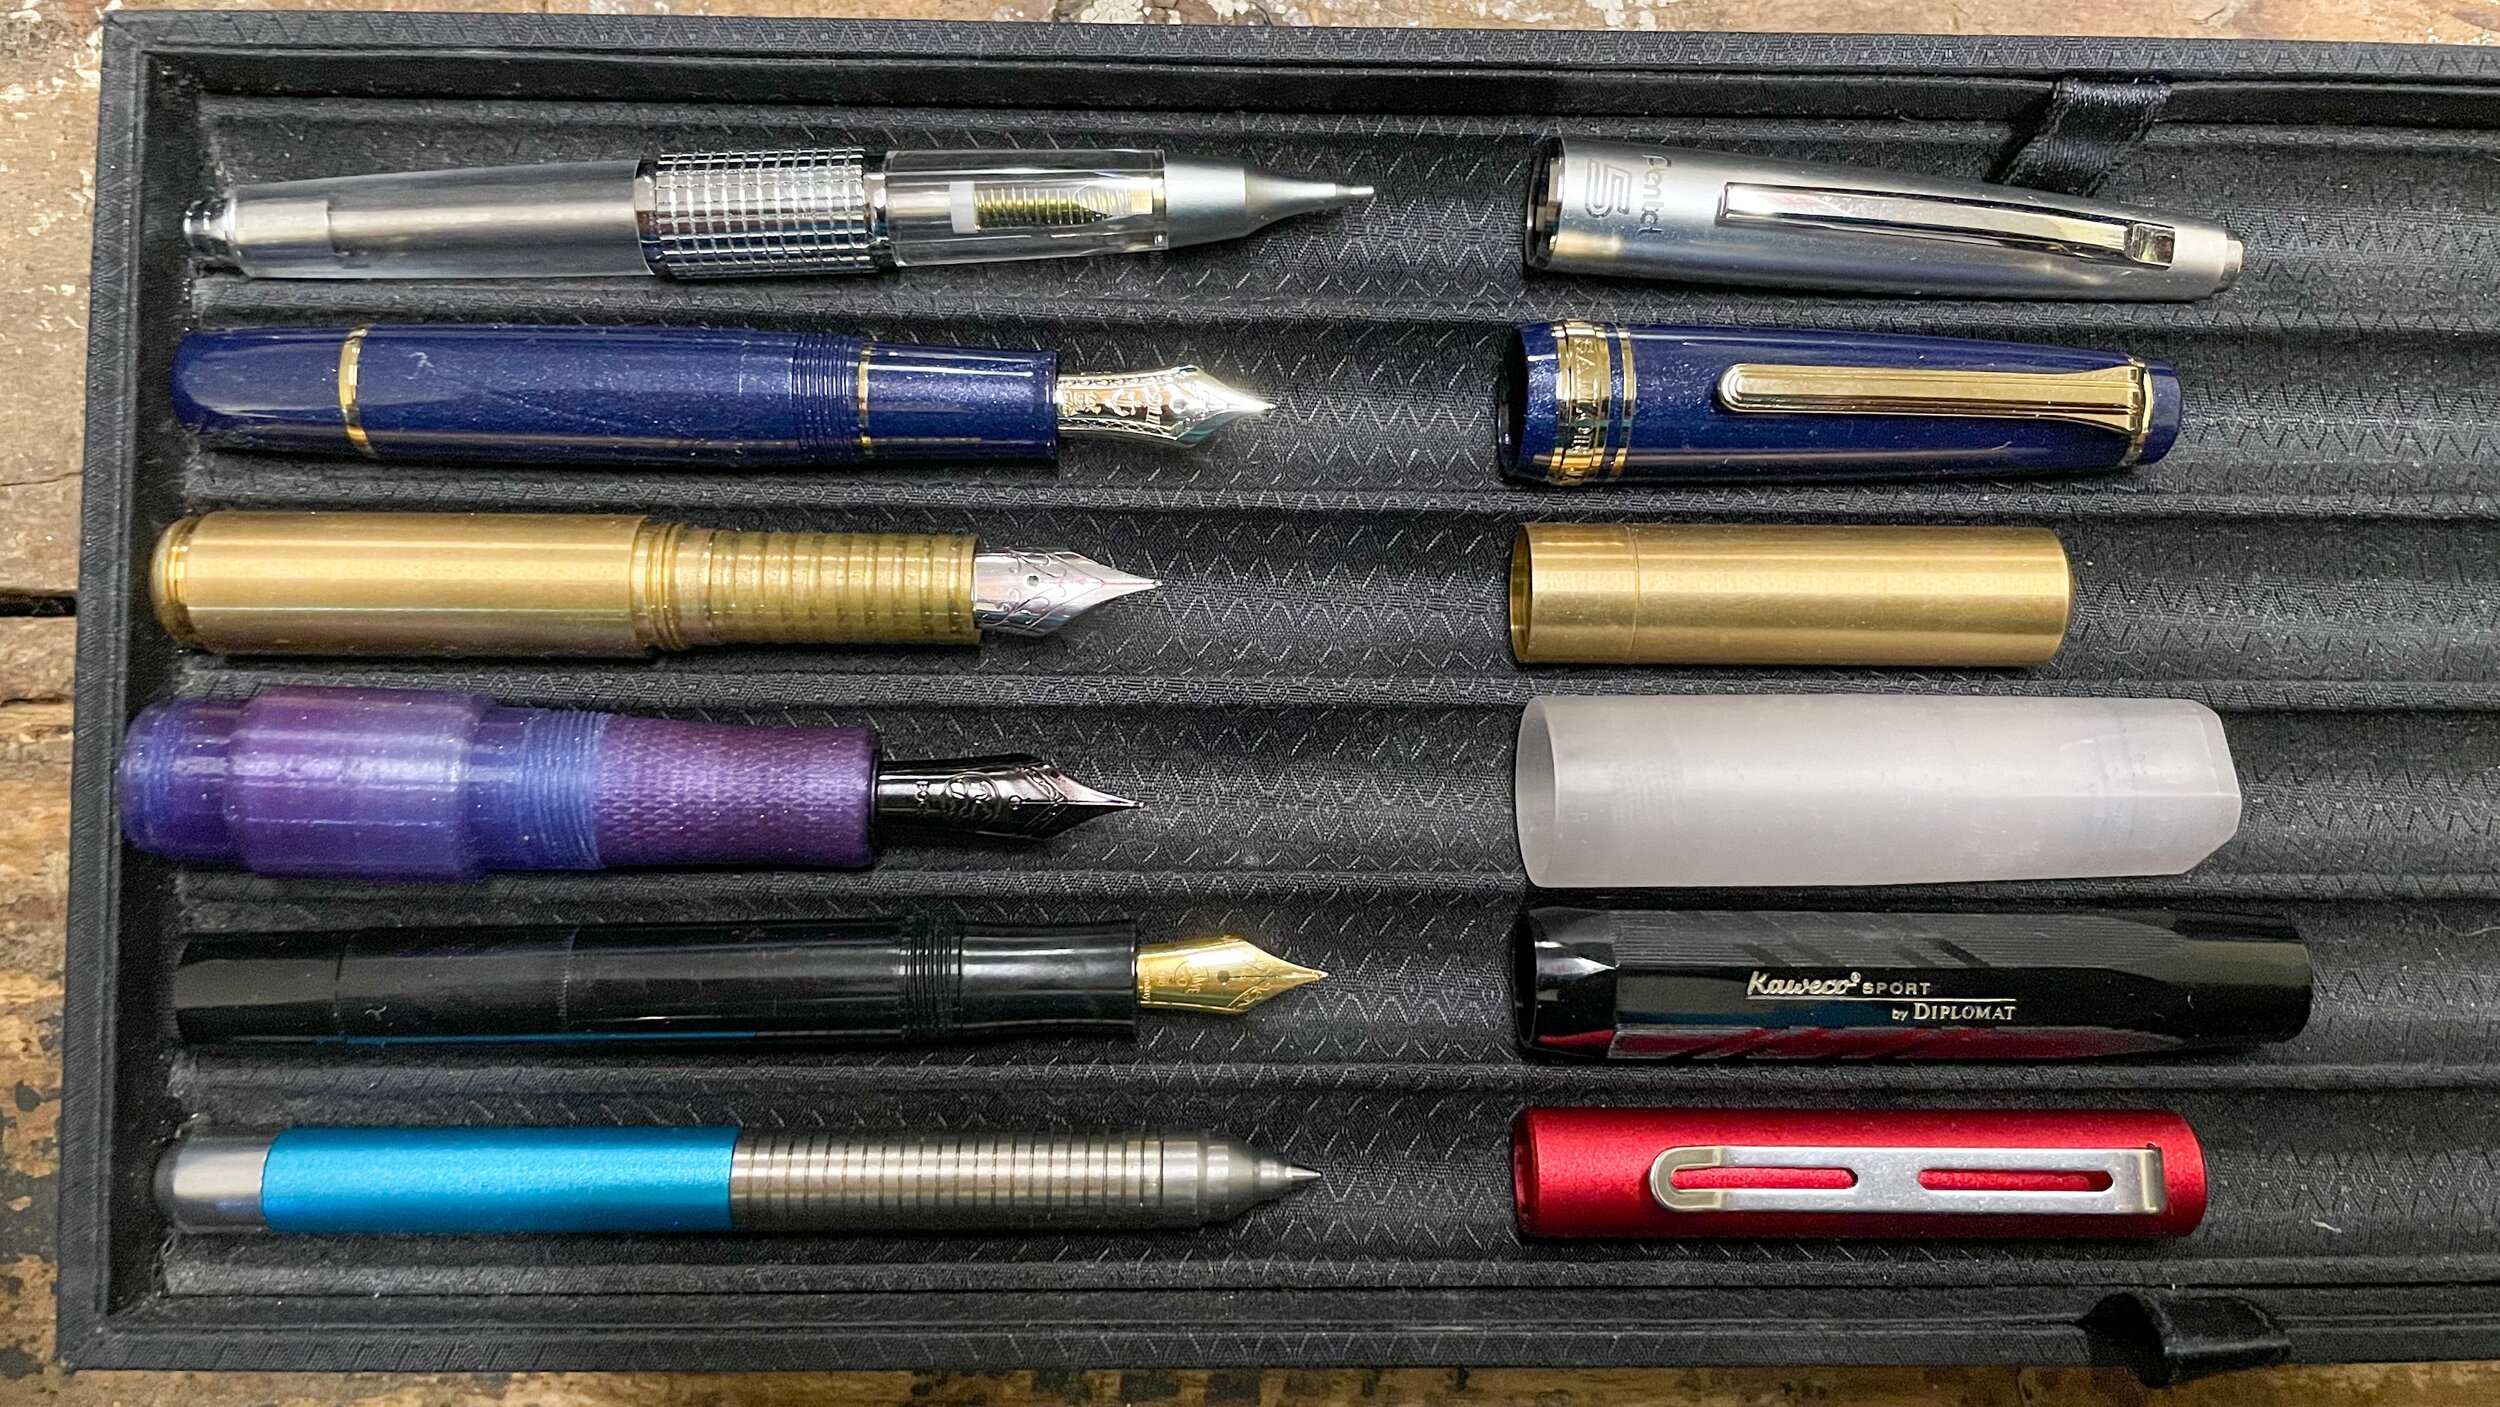 To ask what these pens were!